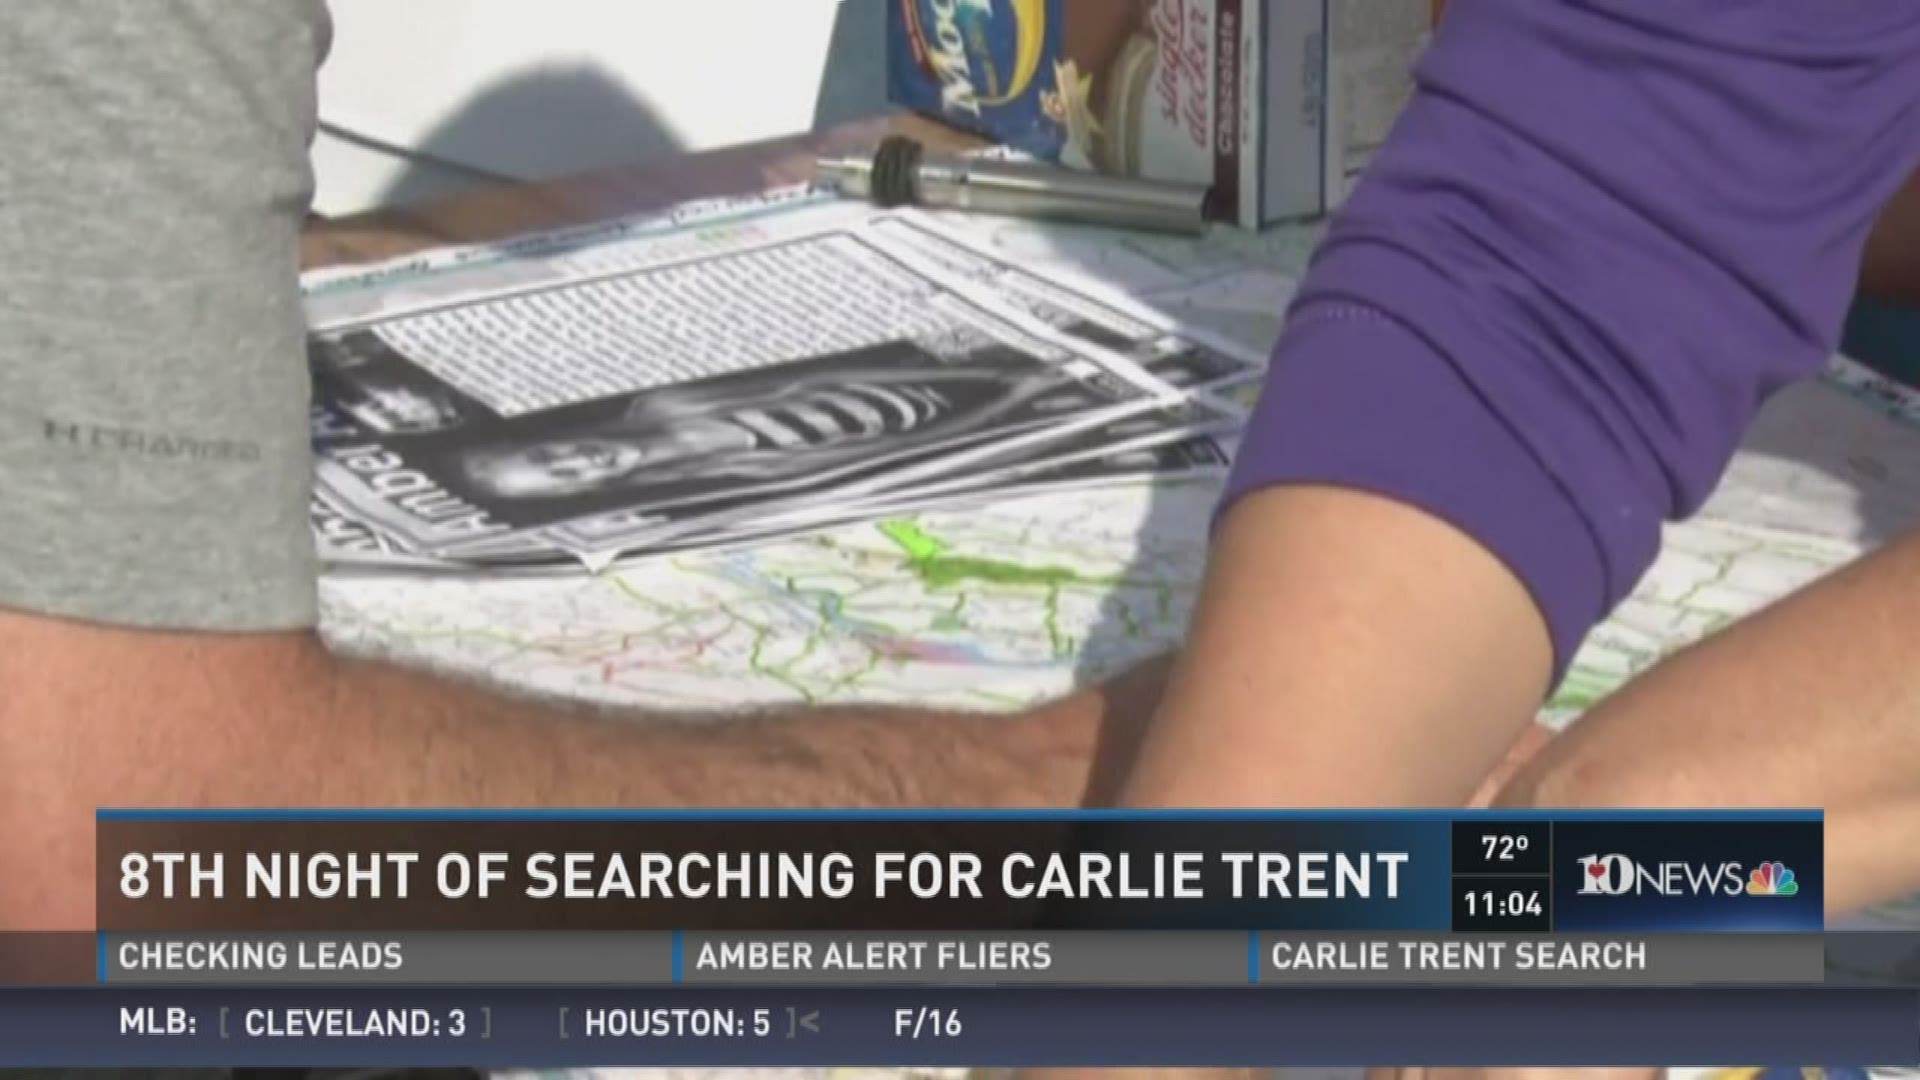 10News anchor Kendall Morris speaks with the cashier who last saw Gary Simpson and Carlie Trent, and volunteers continue their search for the missing 9-year-old.